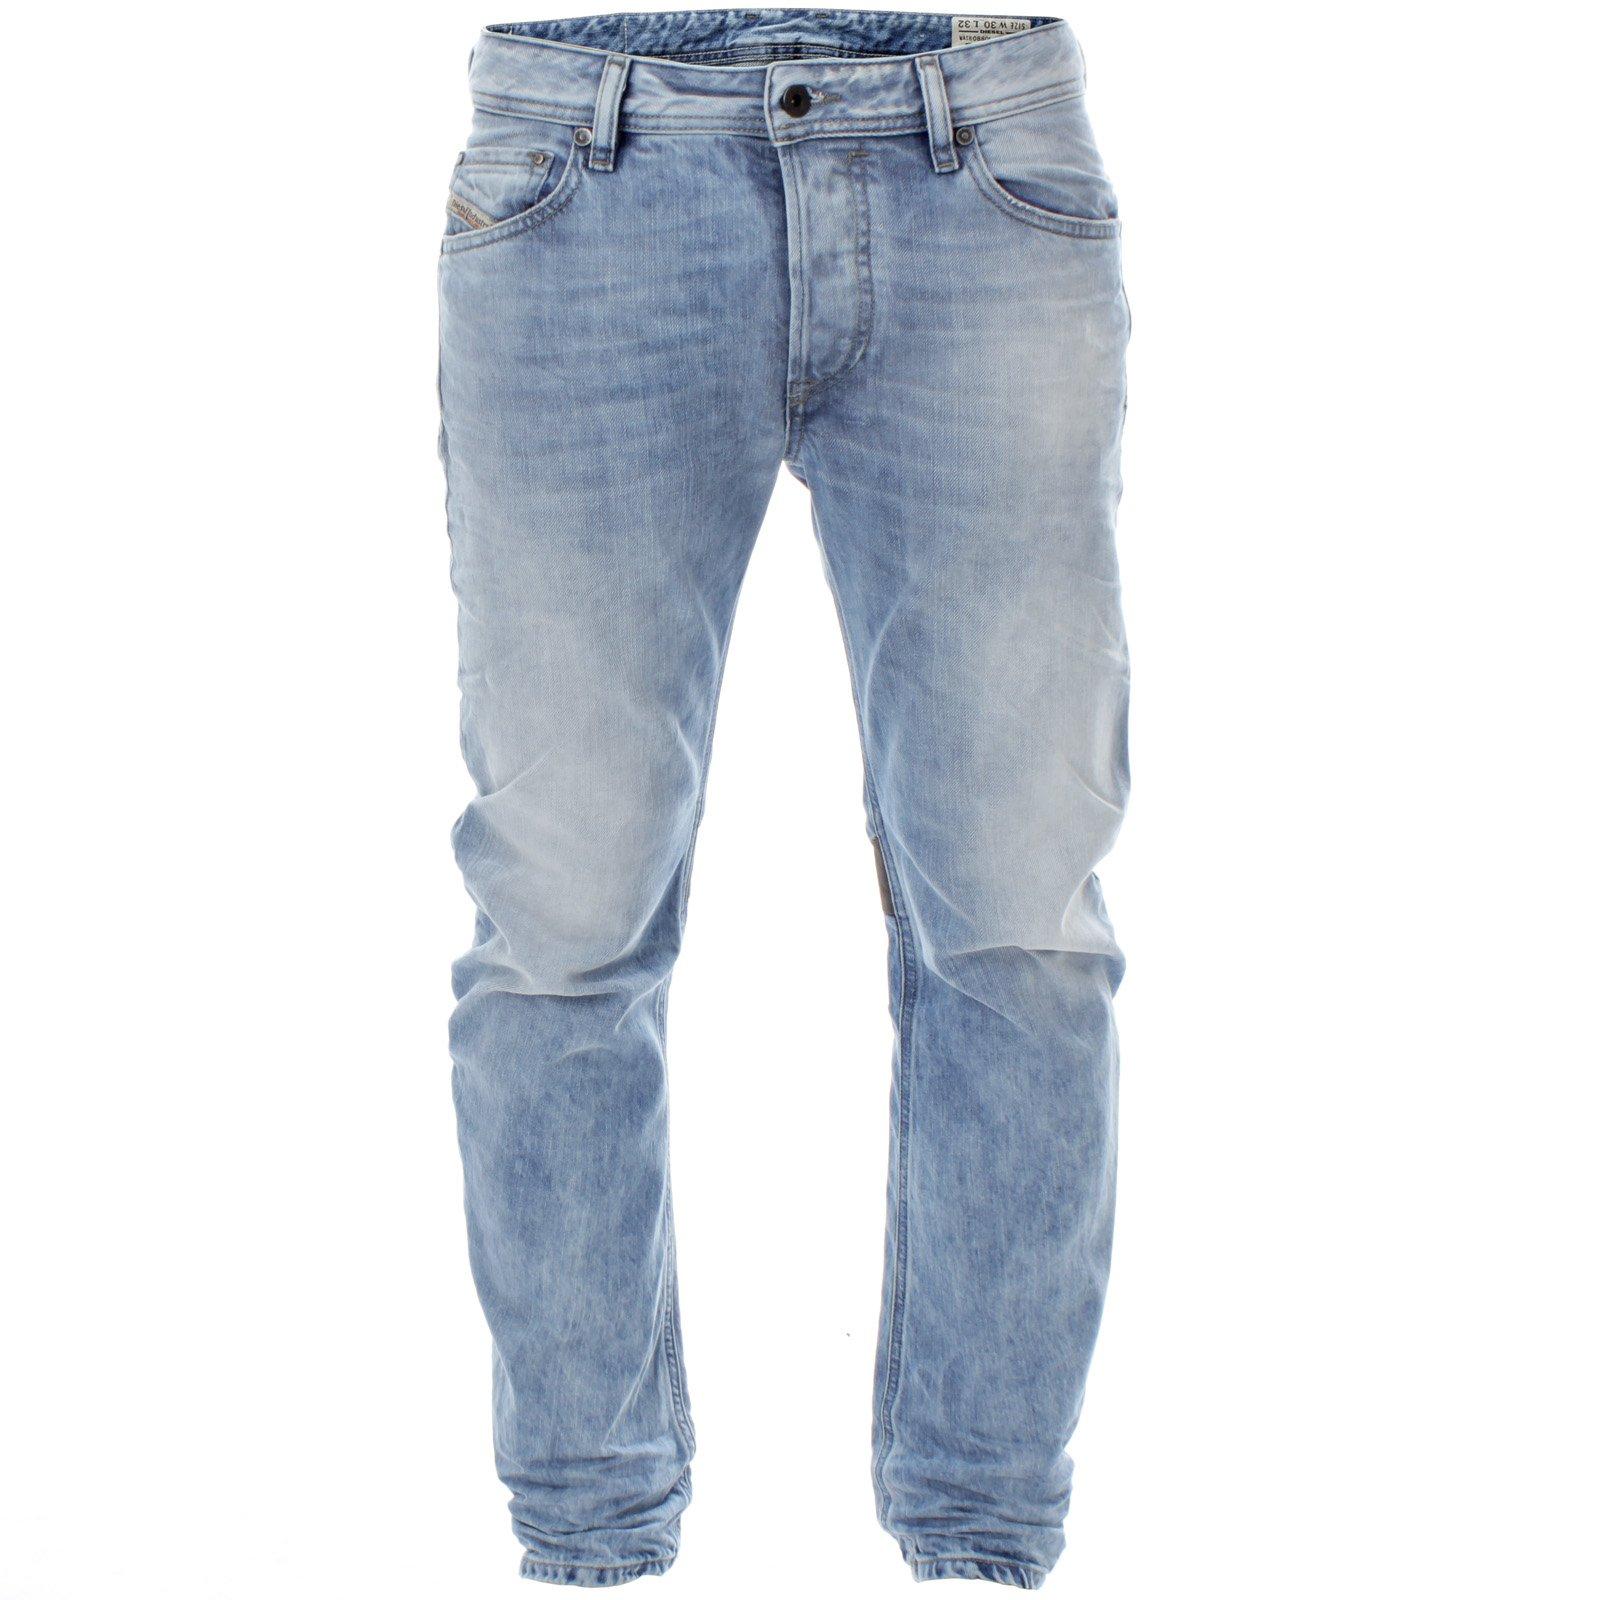 Jeans | Rombee 0880I Jeans | Diesel